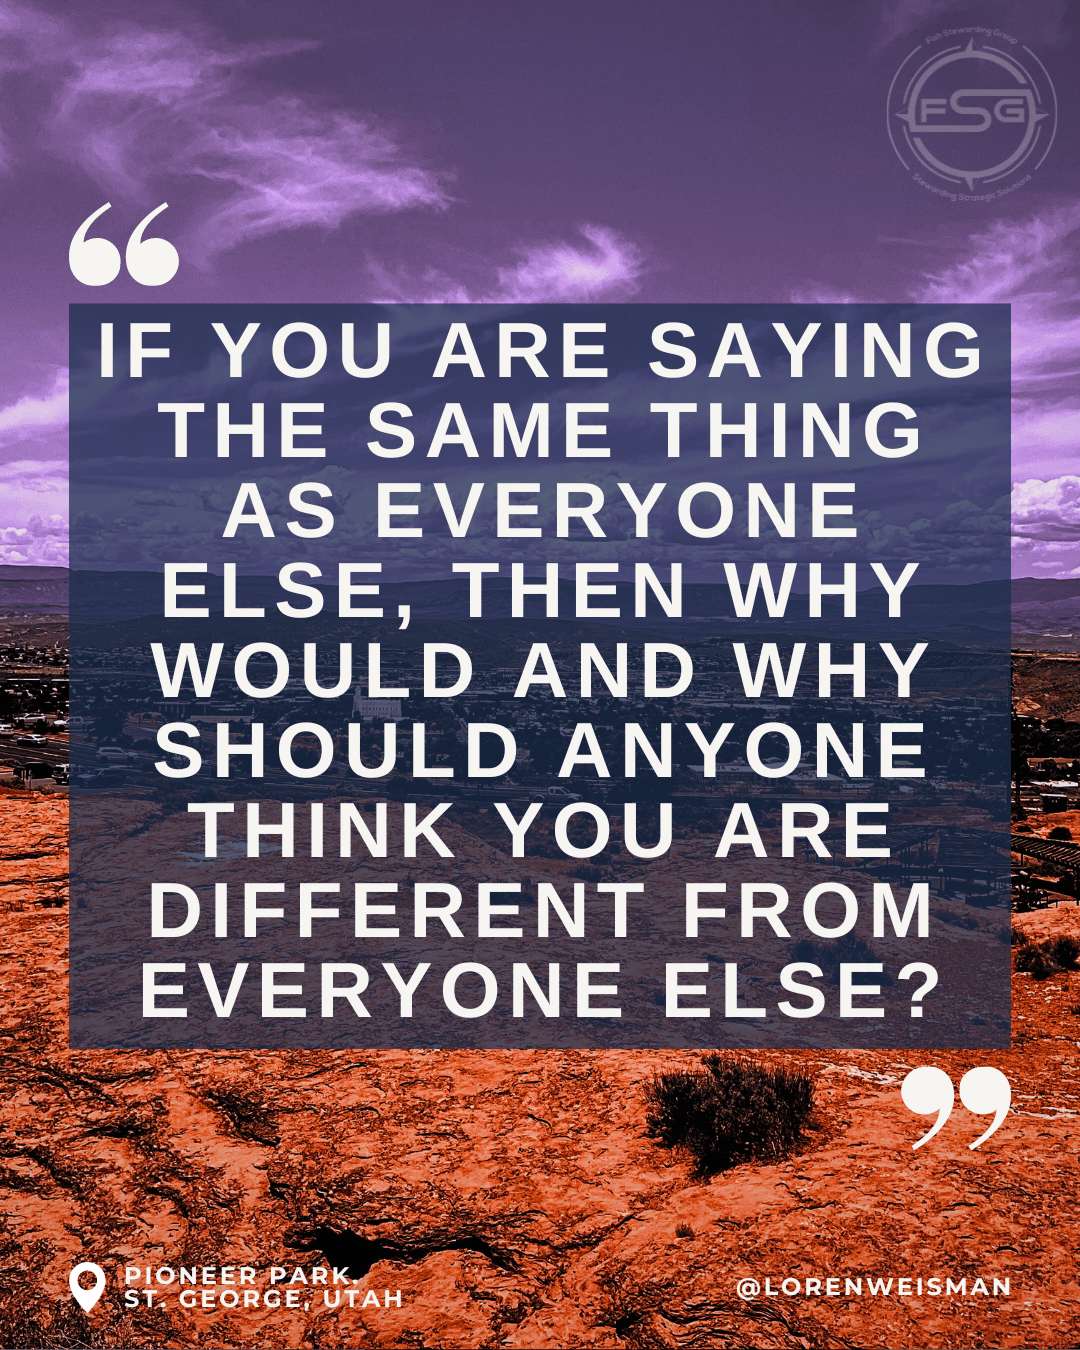 If you are saying the same thing as everyone else, then why would and why should anyone think you are different from everyone else